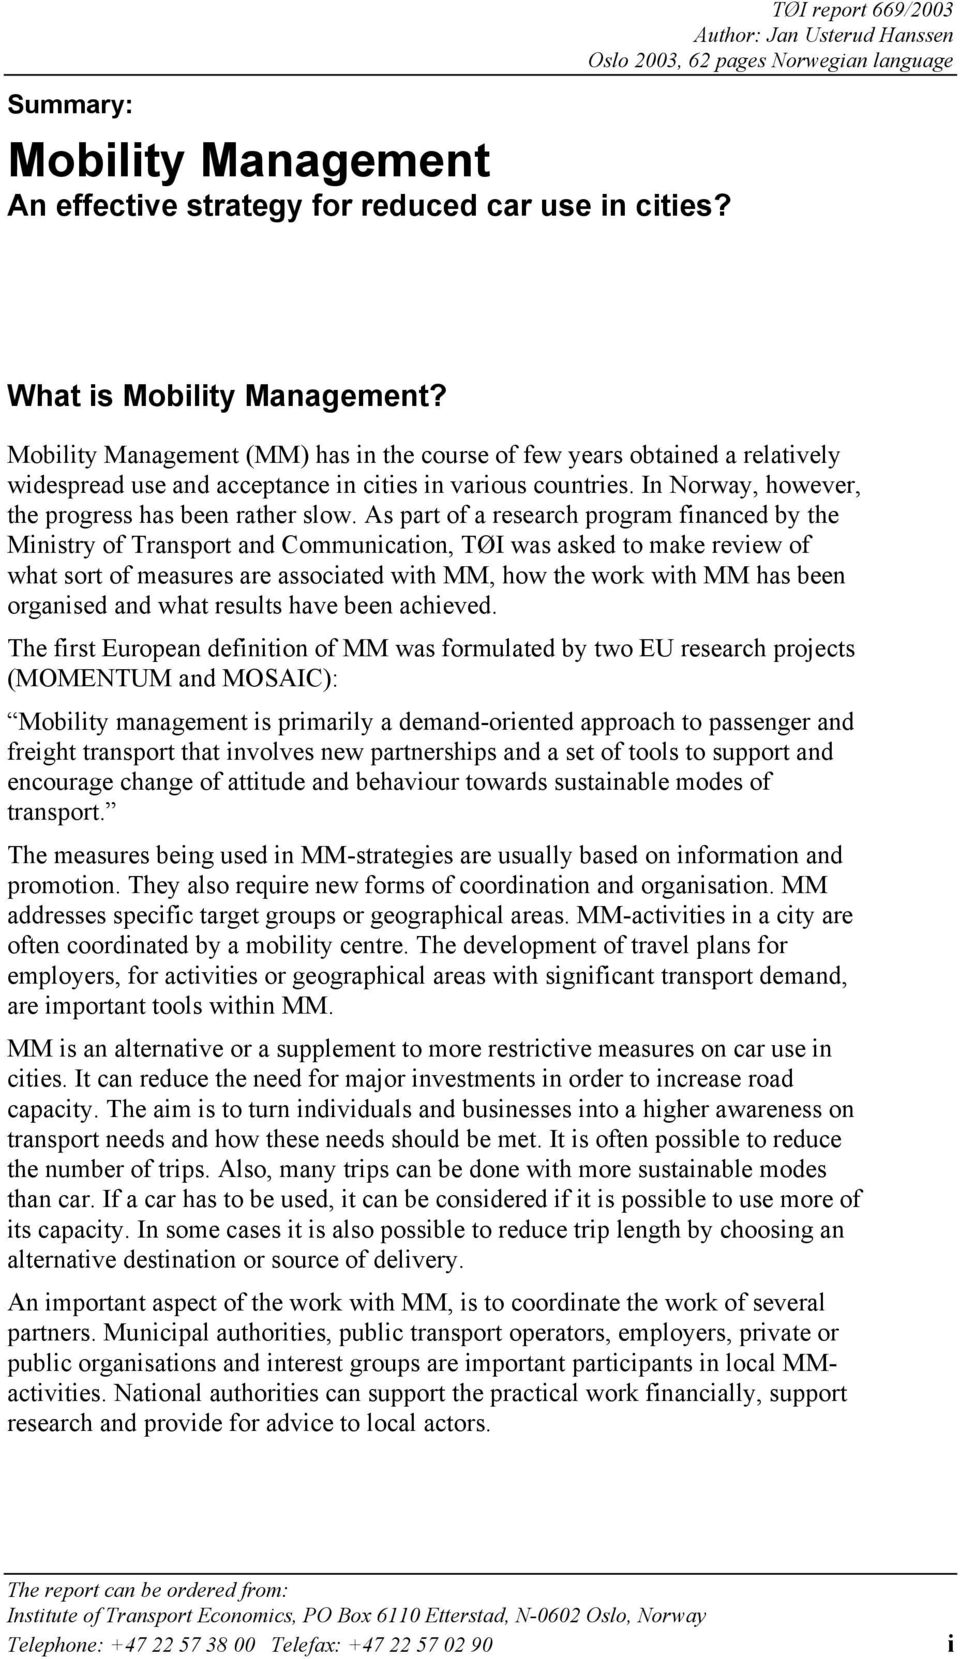 As part of a research program financed by the Ministry of Transport and Communication, TØI was asked to make review of what sort of measures are associated with MM, how the work with MM has been